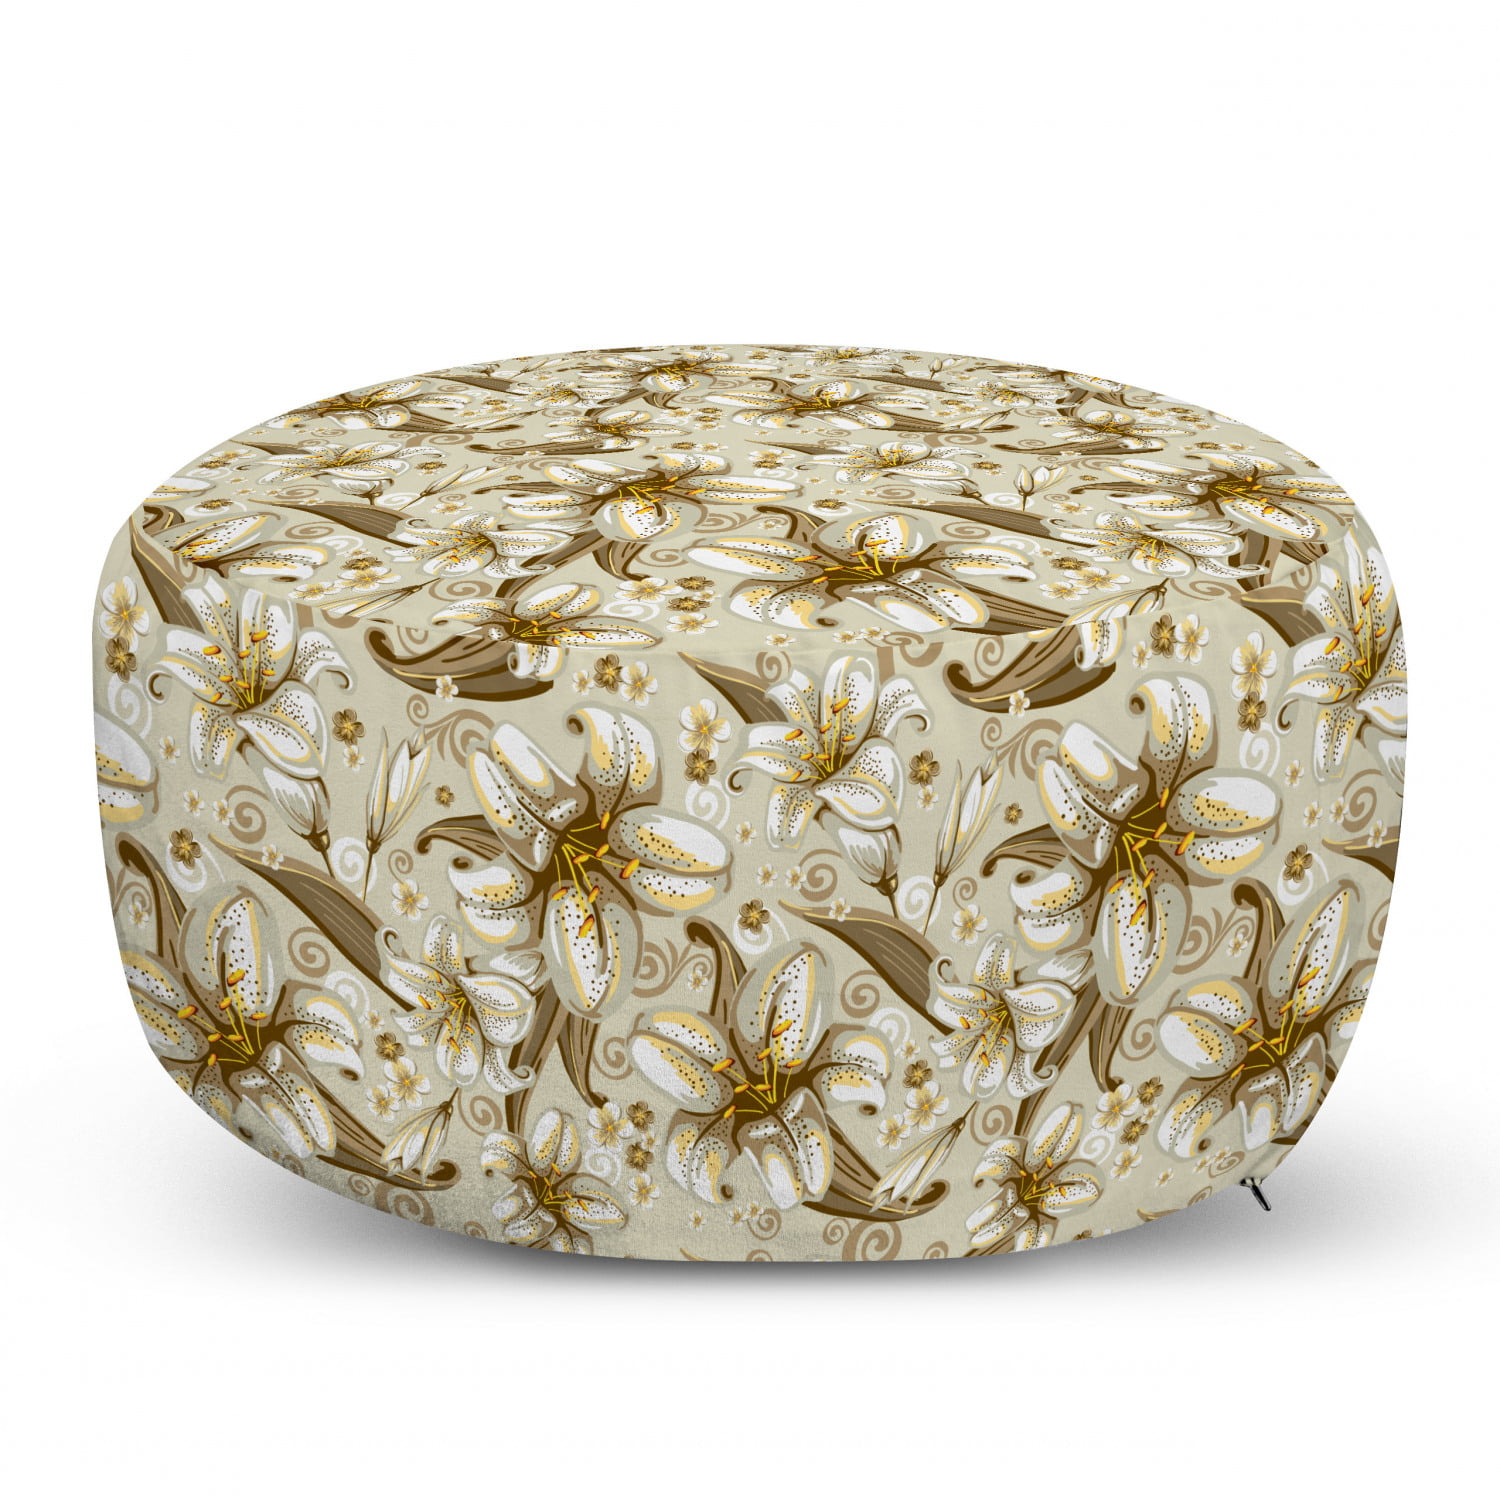 Abstract Floral Background Flourishing Nature Romantic Botanical Arrangement Indigo White Under Desk Foot Stool for Living Room Office Ottoman with Cover 25 Ambesonne Dandelion Rectangle Pouf